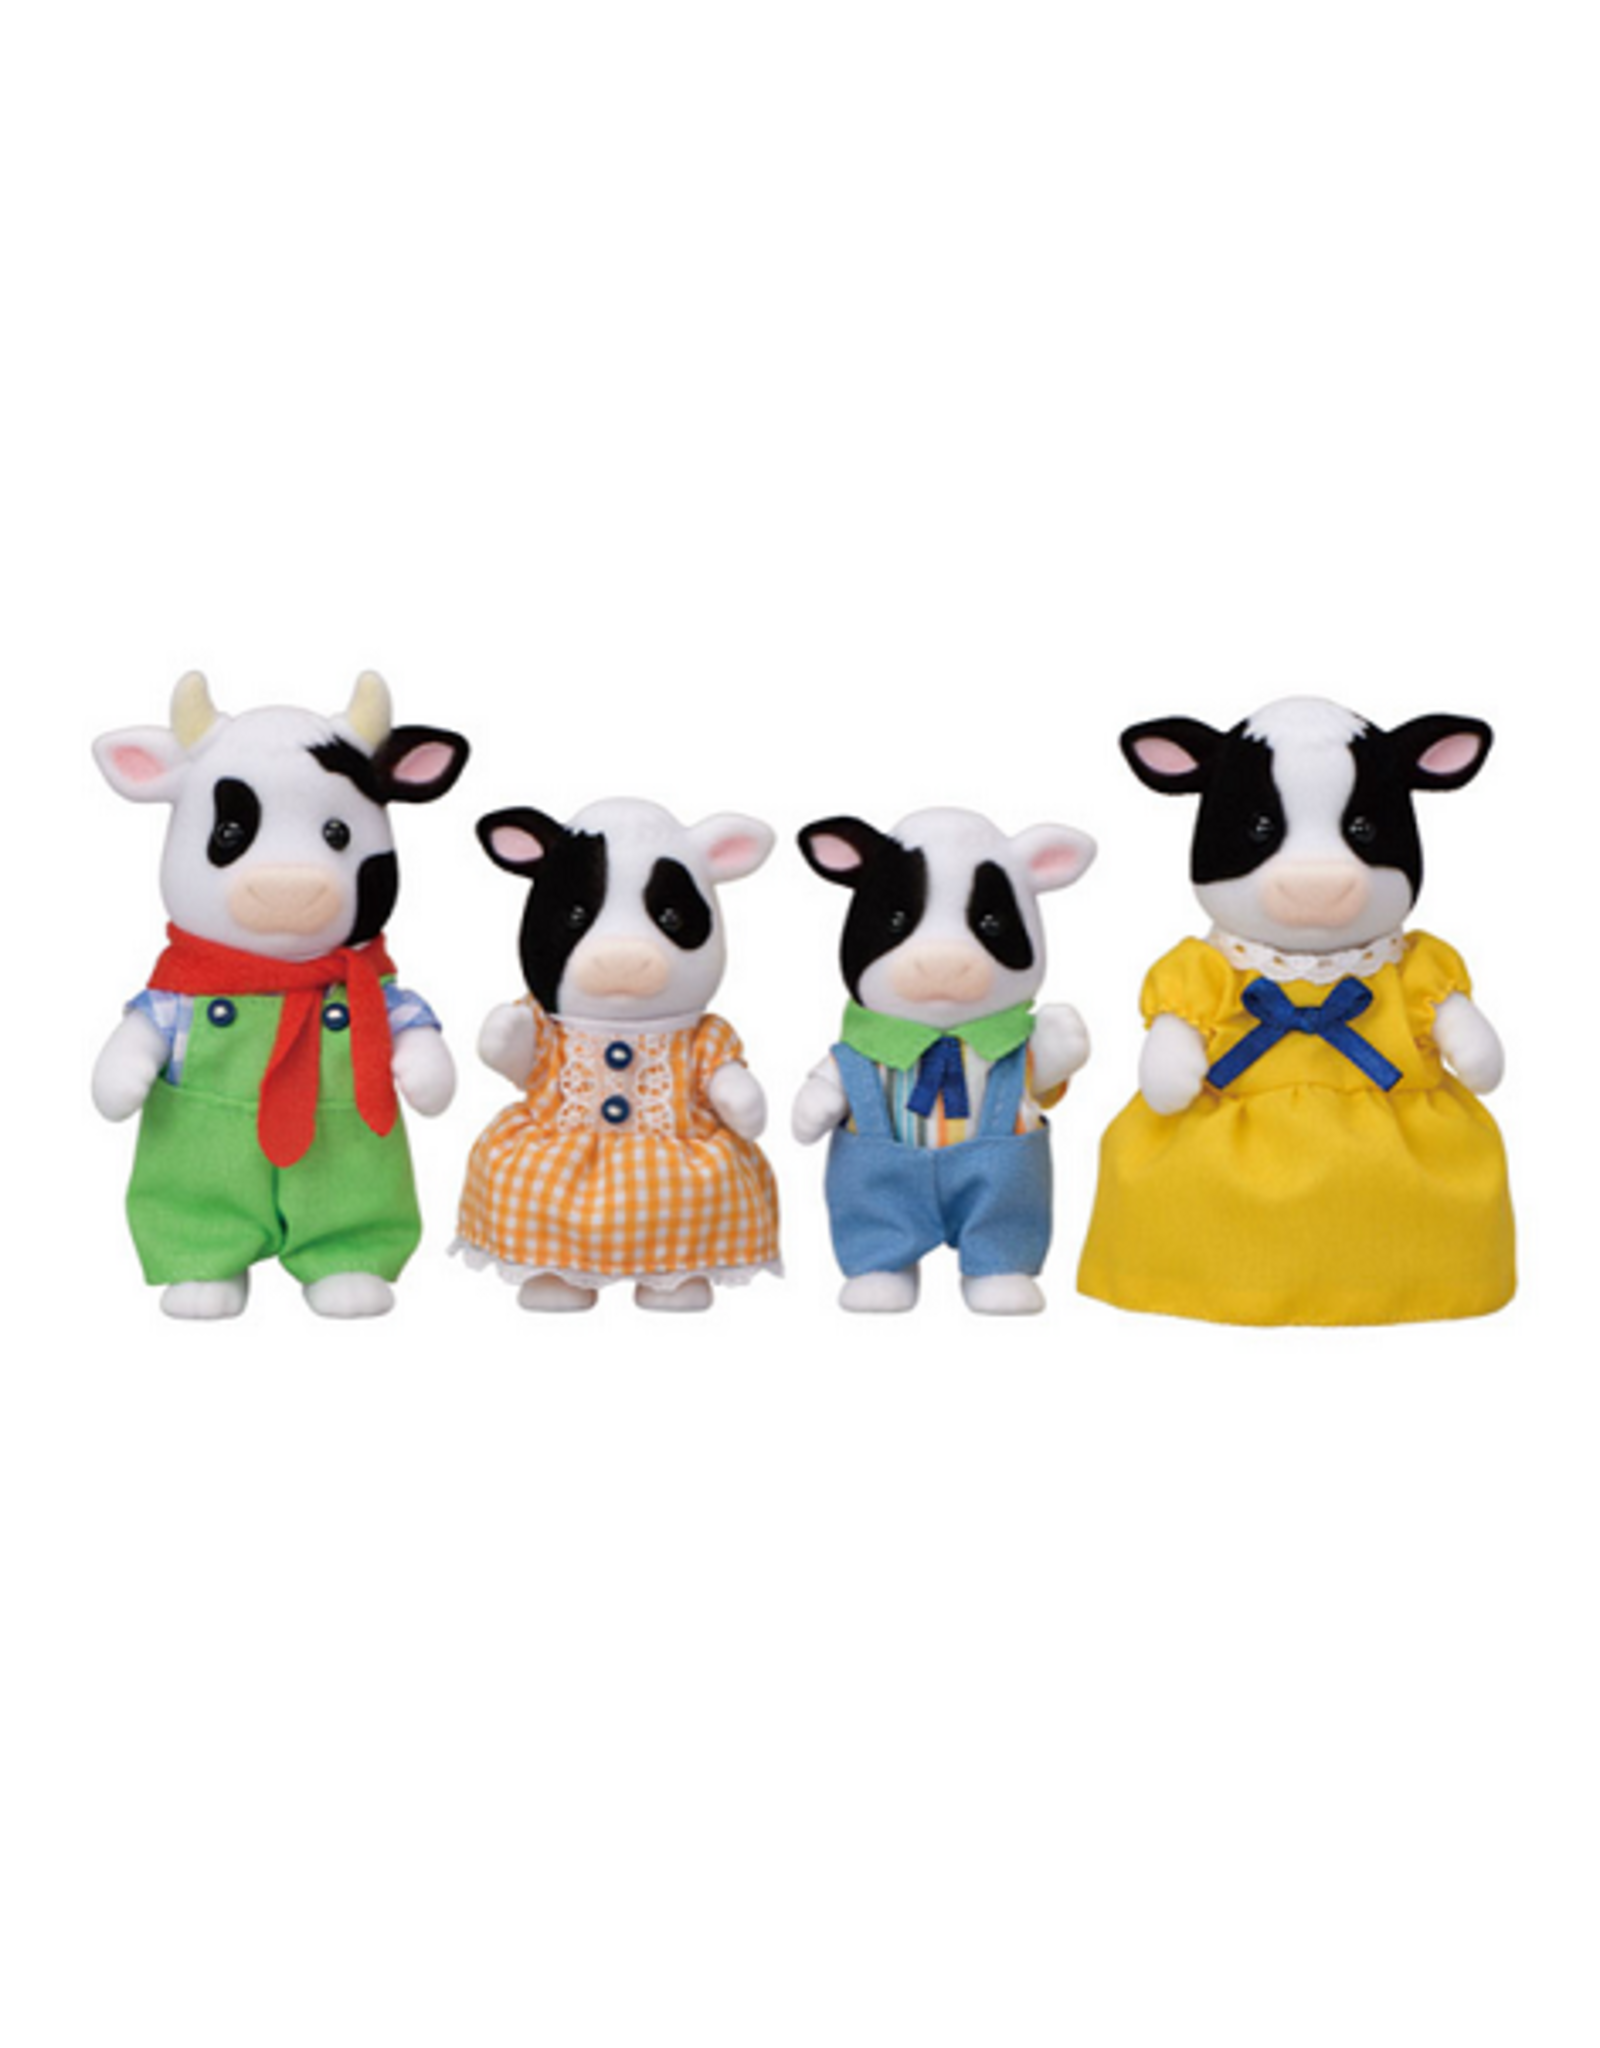 Calico Critters Friesian Cow Family